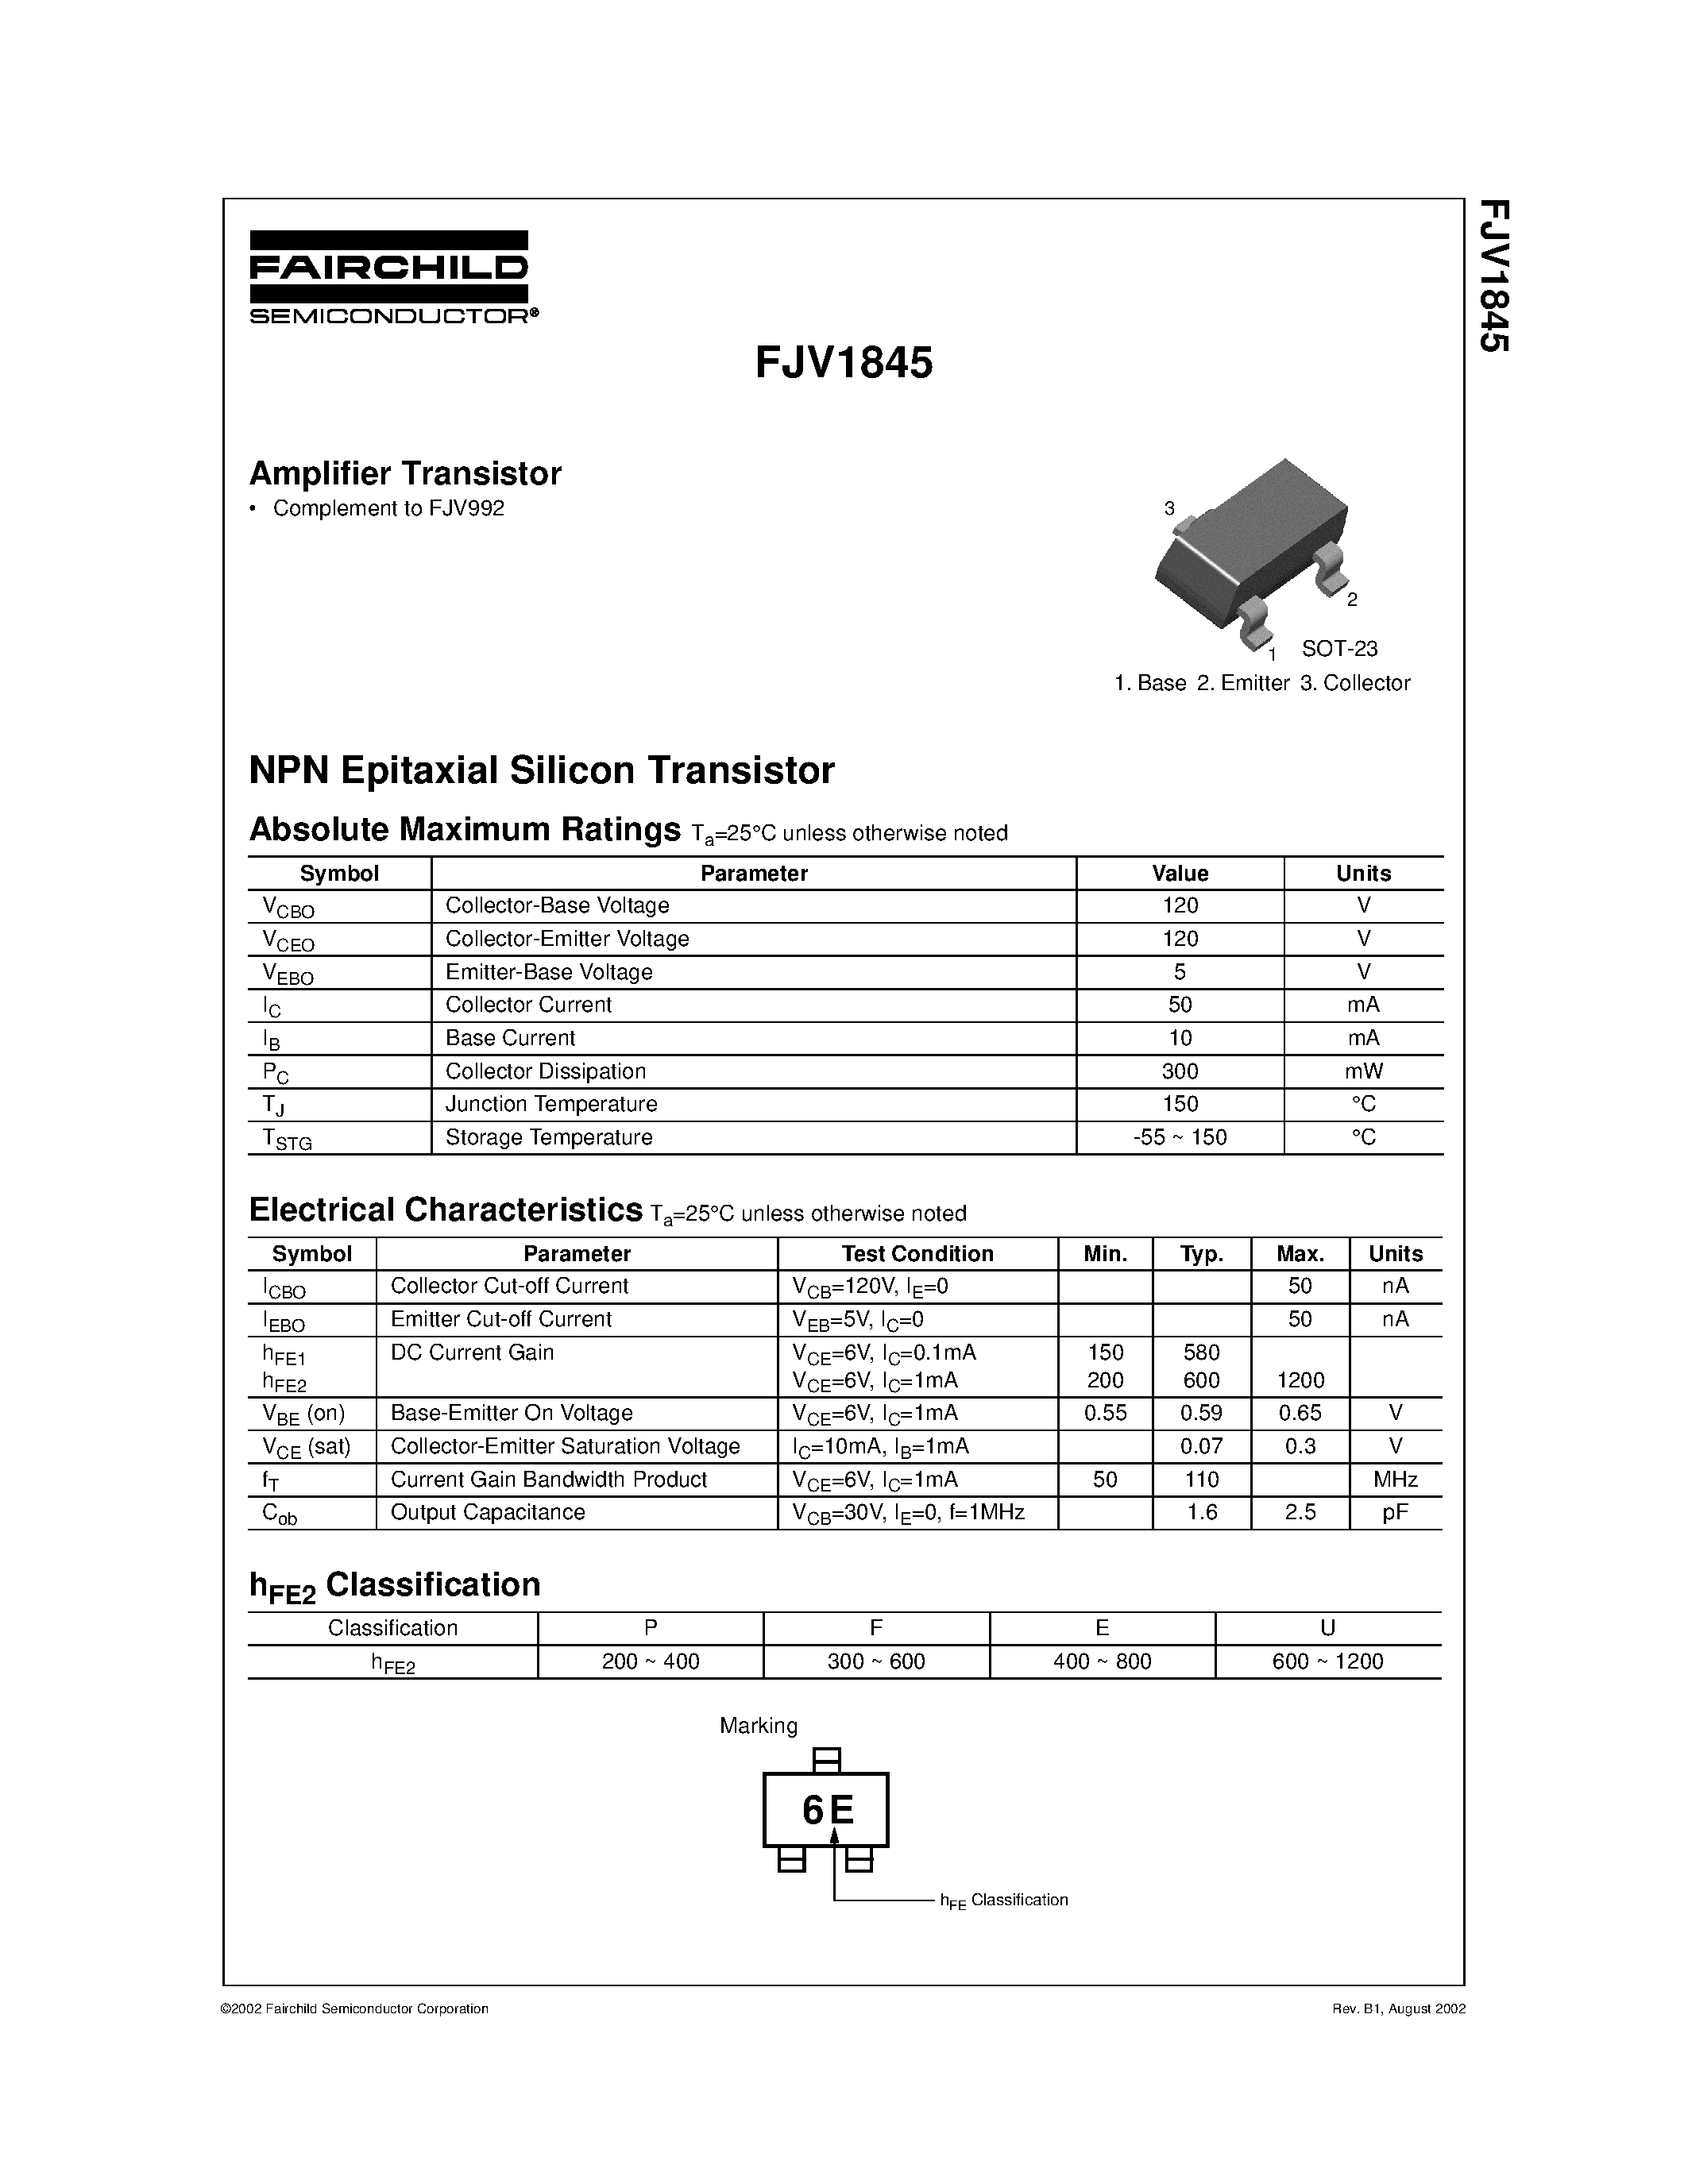 Datasheet FJV1845 - NPN Epitaxial Silicon Transistor page 1